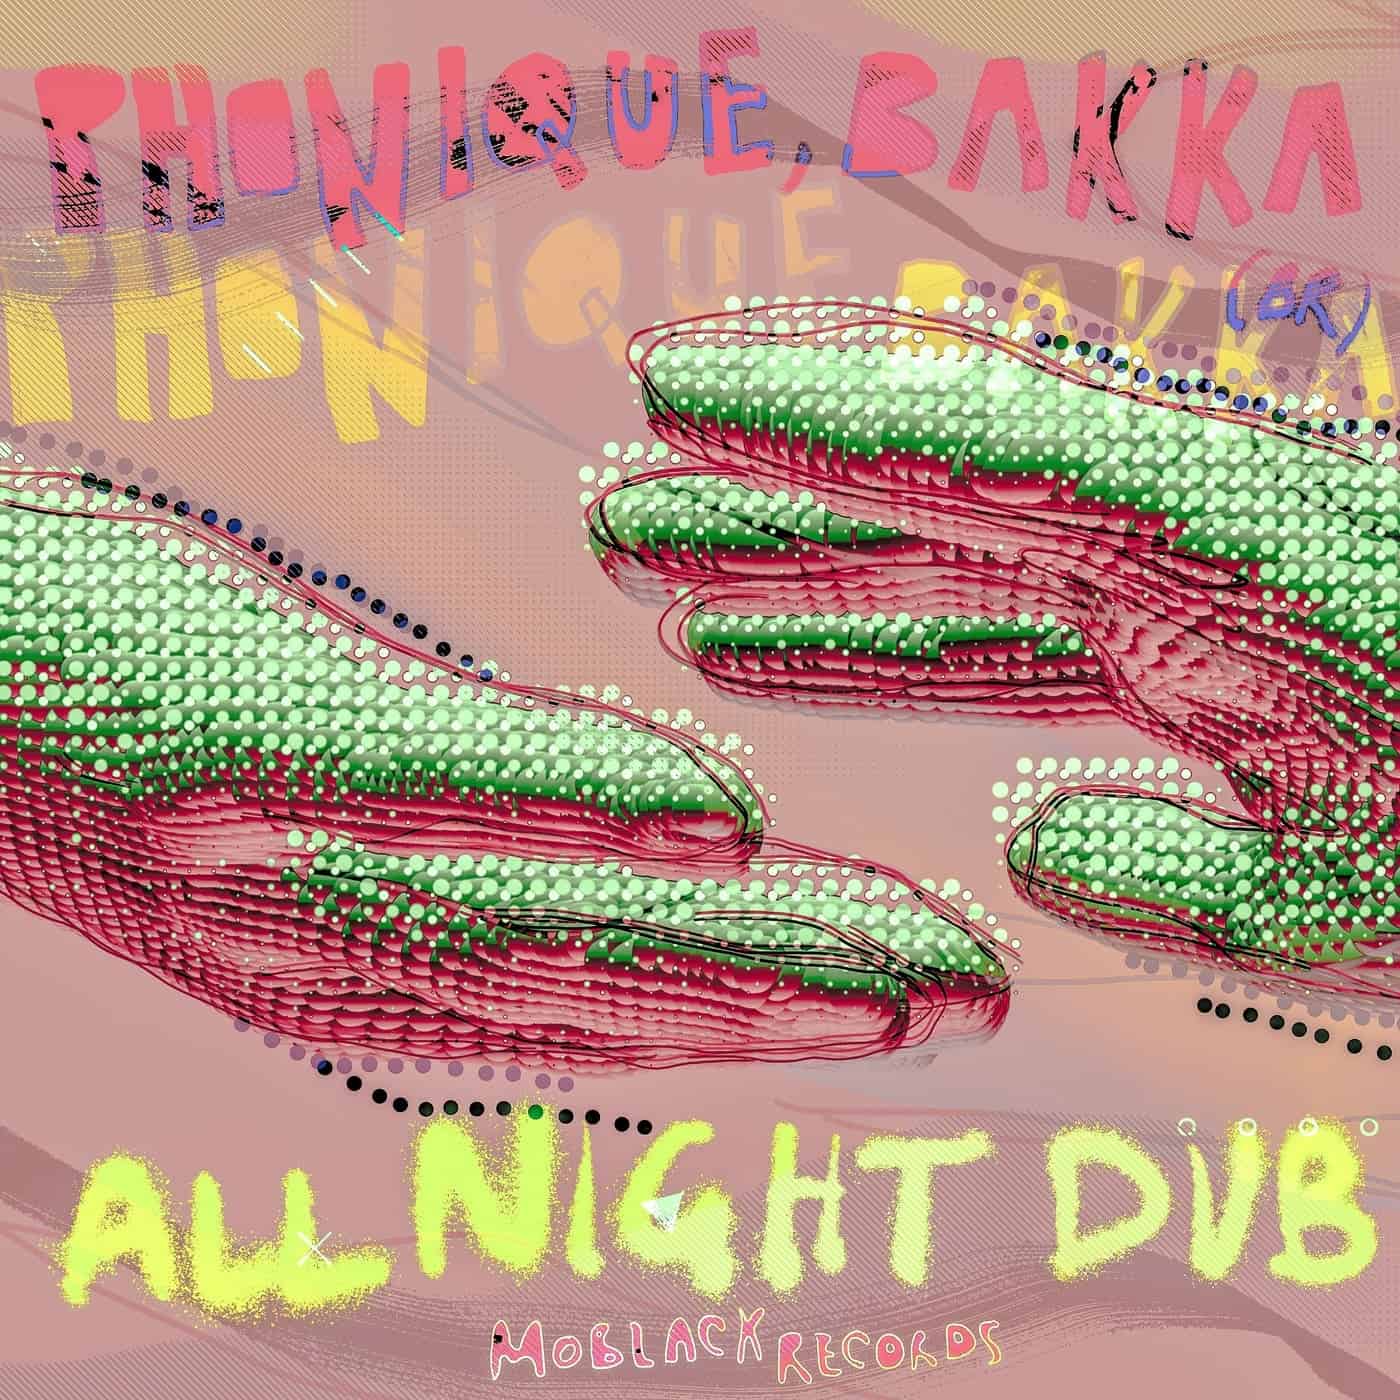 Download Phonique, Bakka (BR) - All Night Dub [MBR486] on Electrobuzz